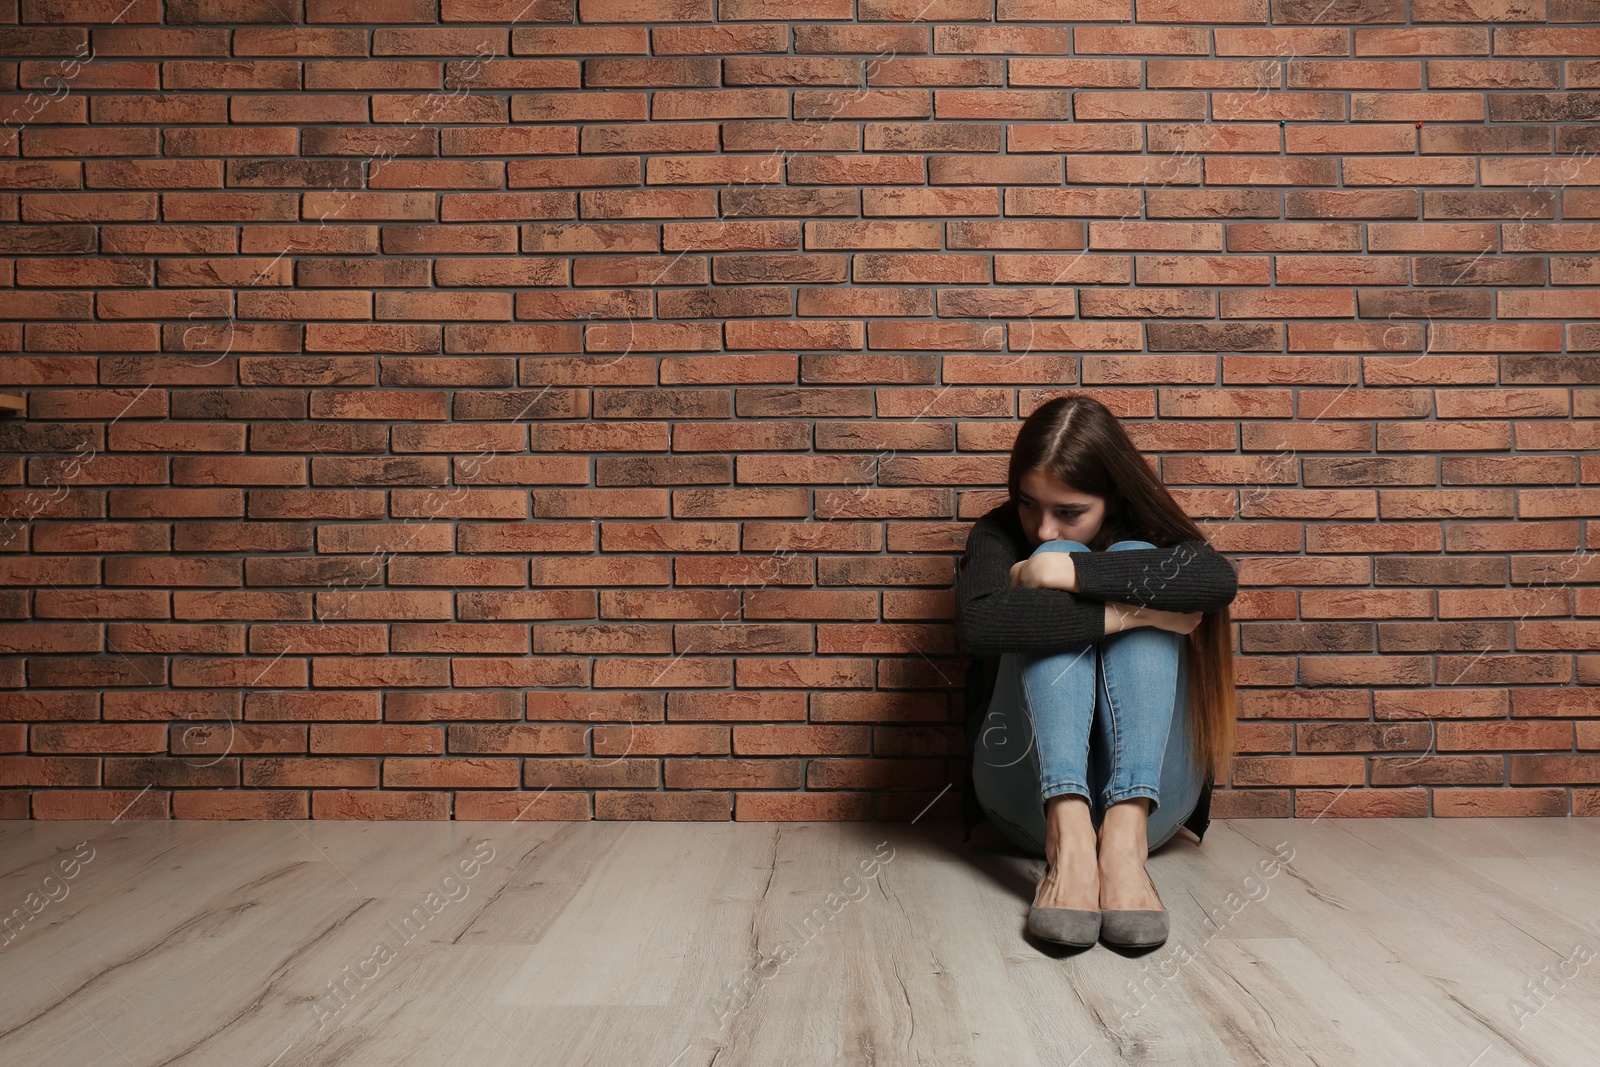 Photo of Upset teenage girl sitting on floor near wall. Space for text